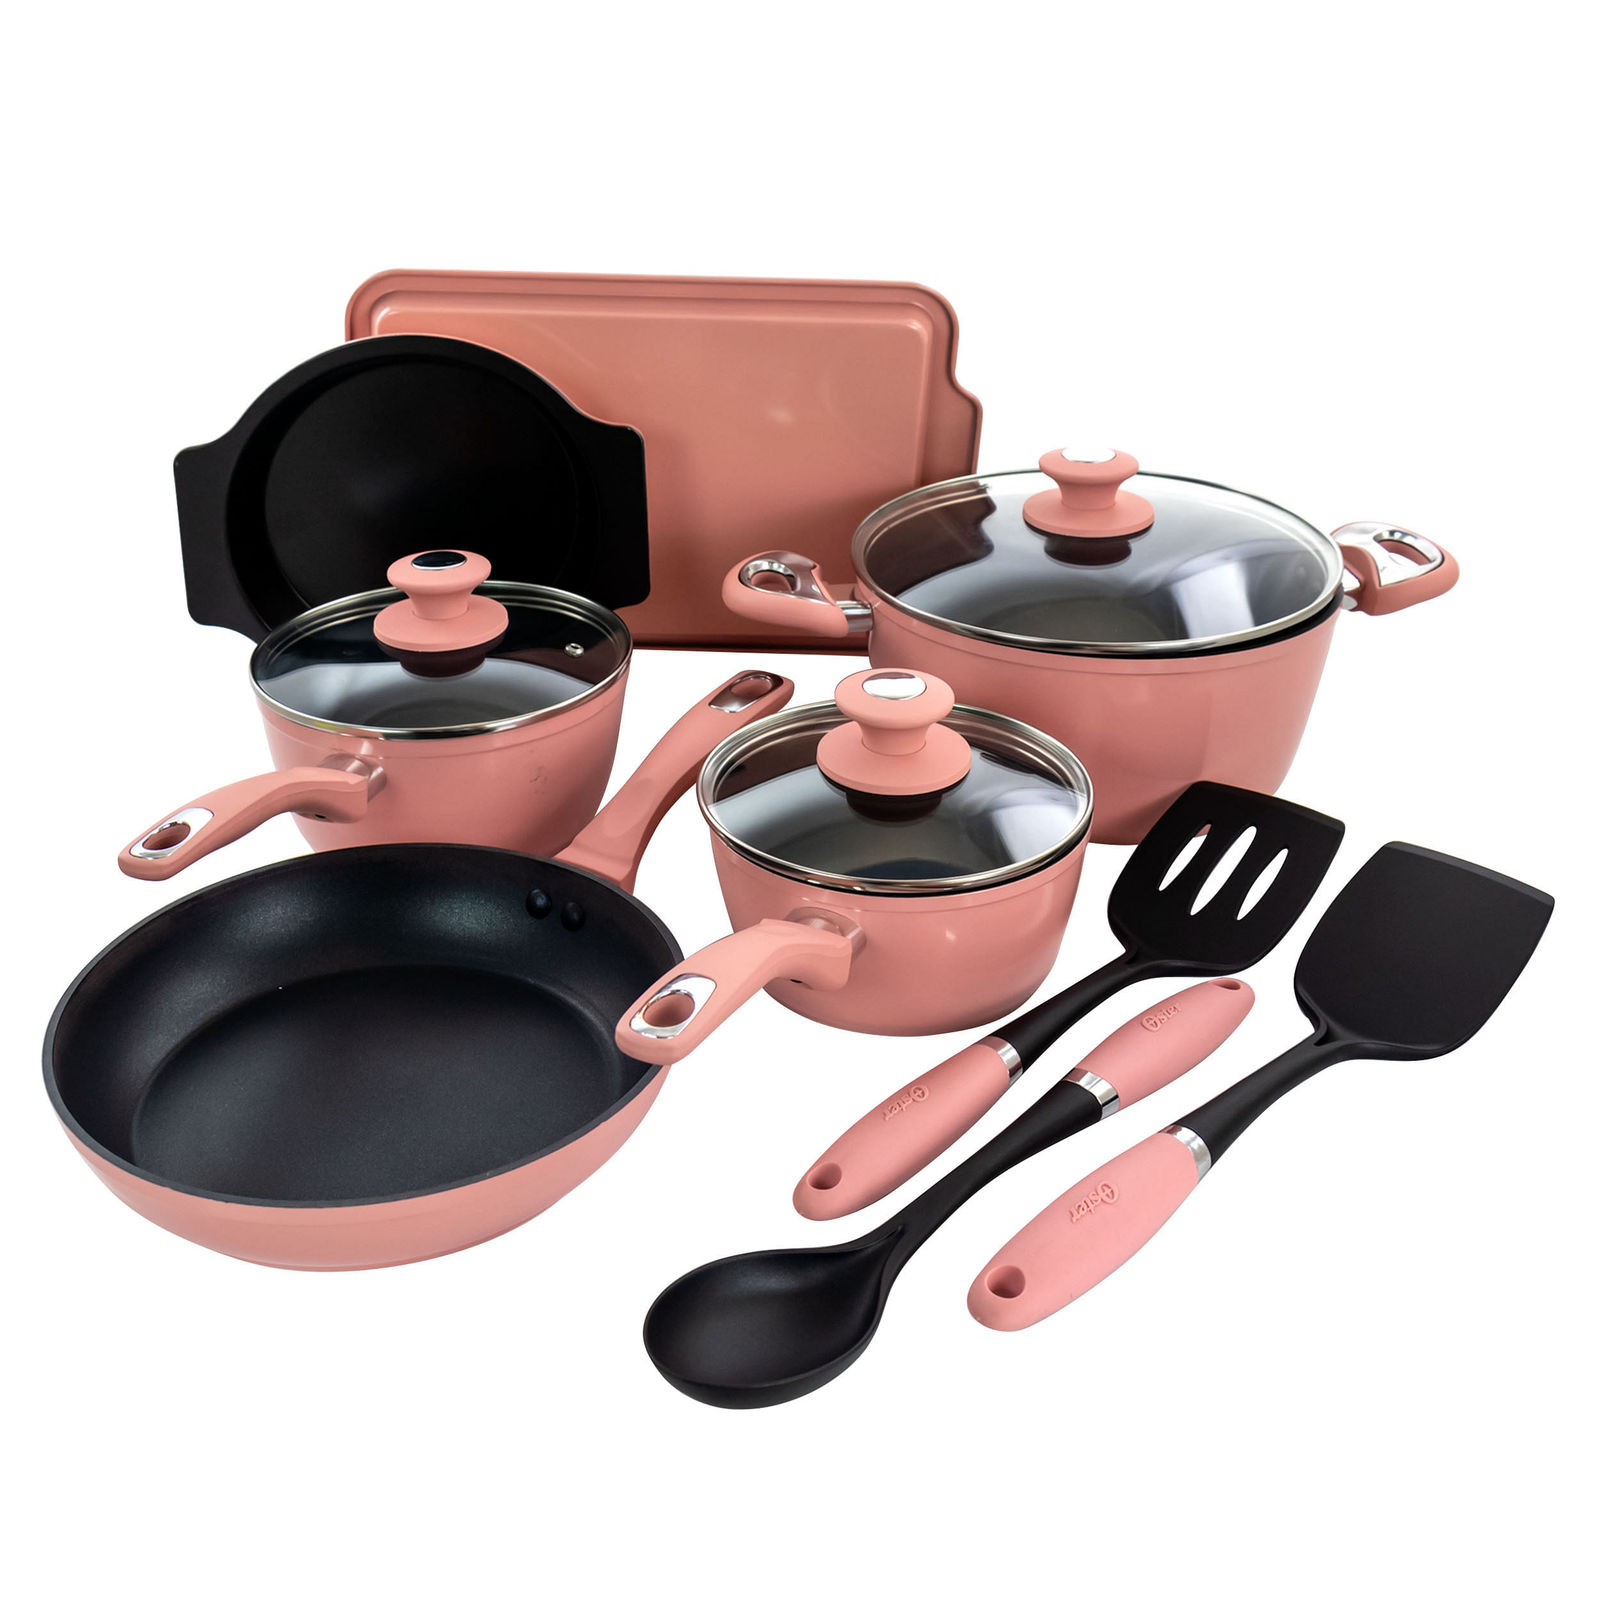 Oster Lynhurst 12 Piece Nonstick Aluminum Cookware Set in Pink with Kitchen Too - $145.17